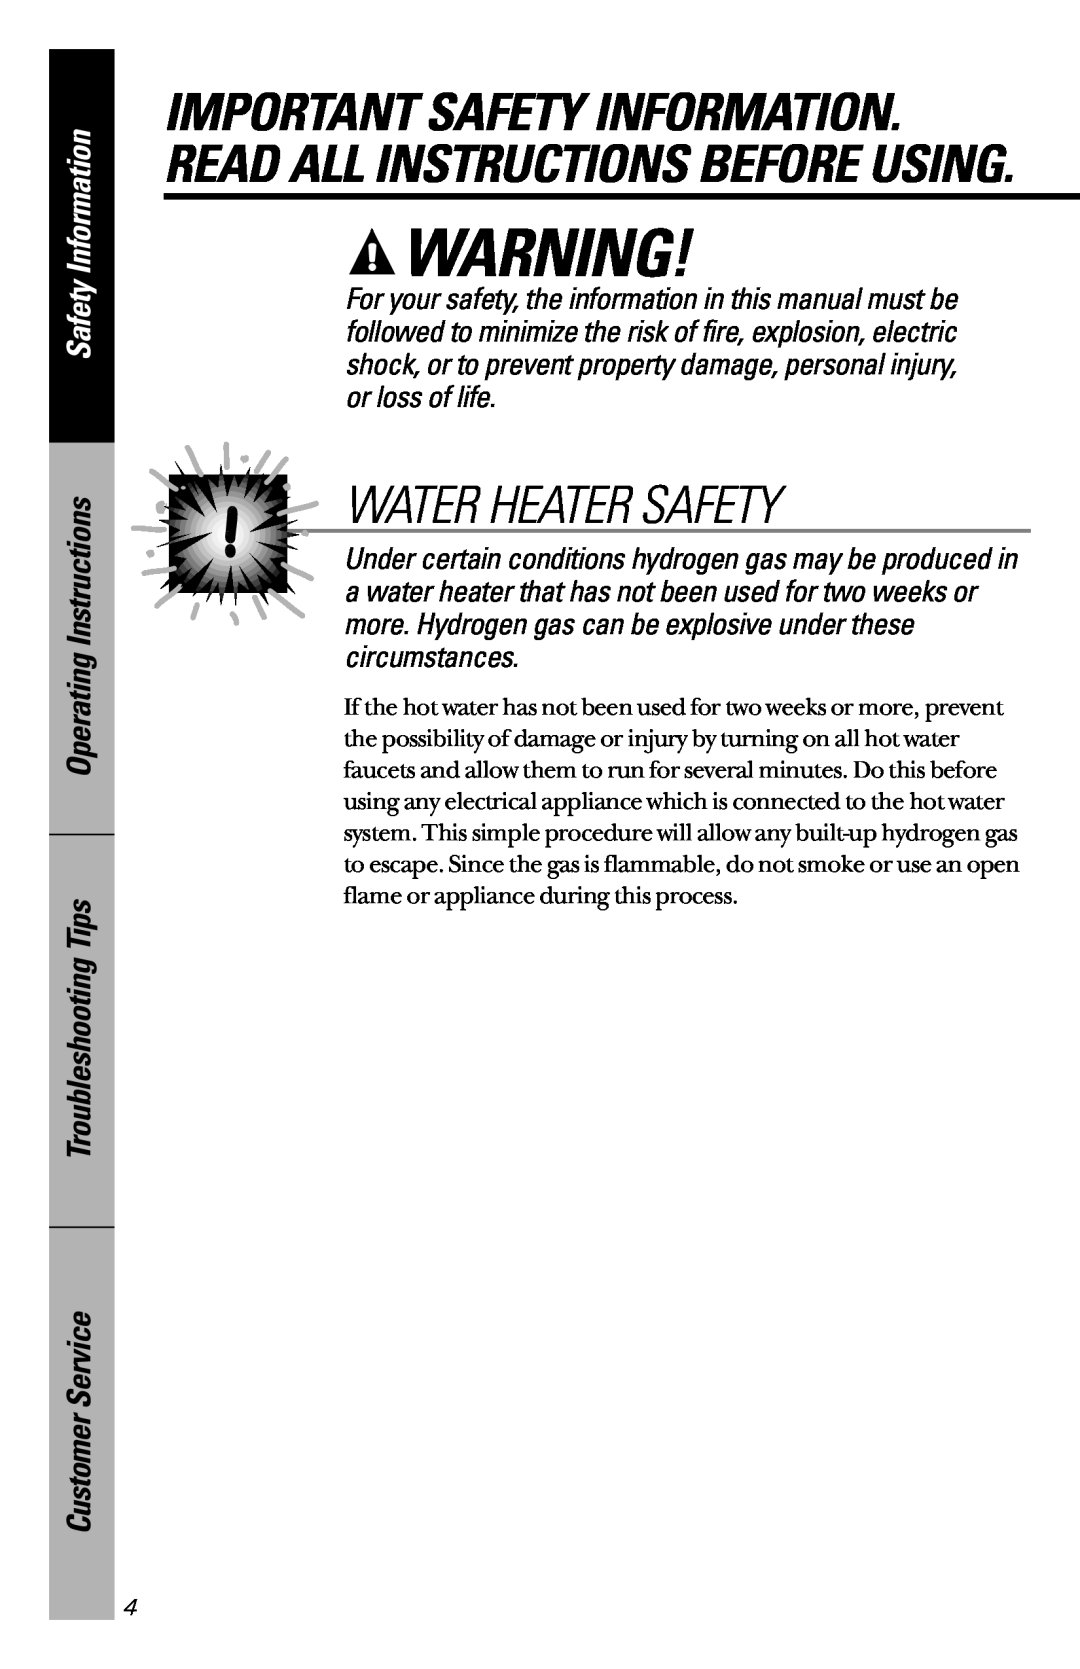 GE GSD650, GSD725, GSD720, GSD715 Water Heater Safety, Important Safety Information. Read All Instructions Before Using 